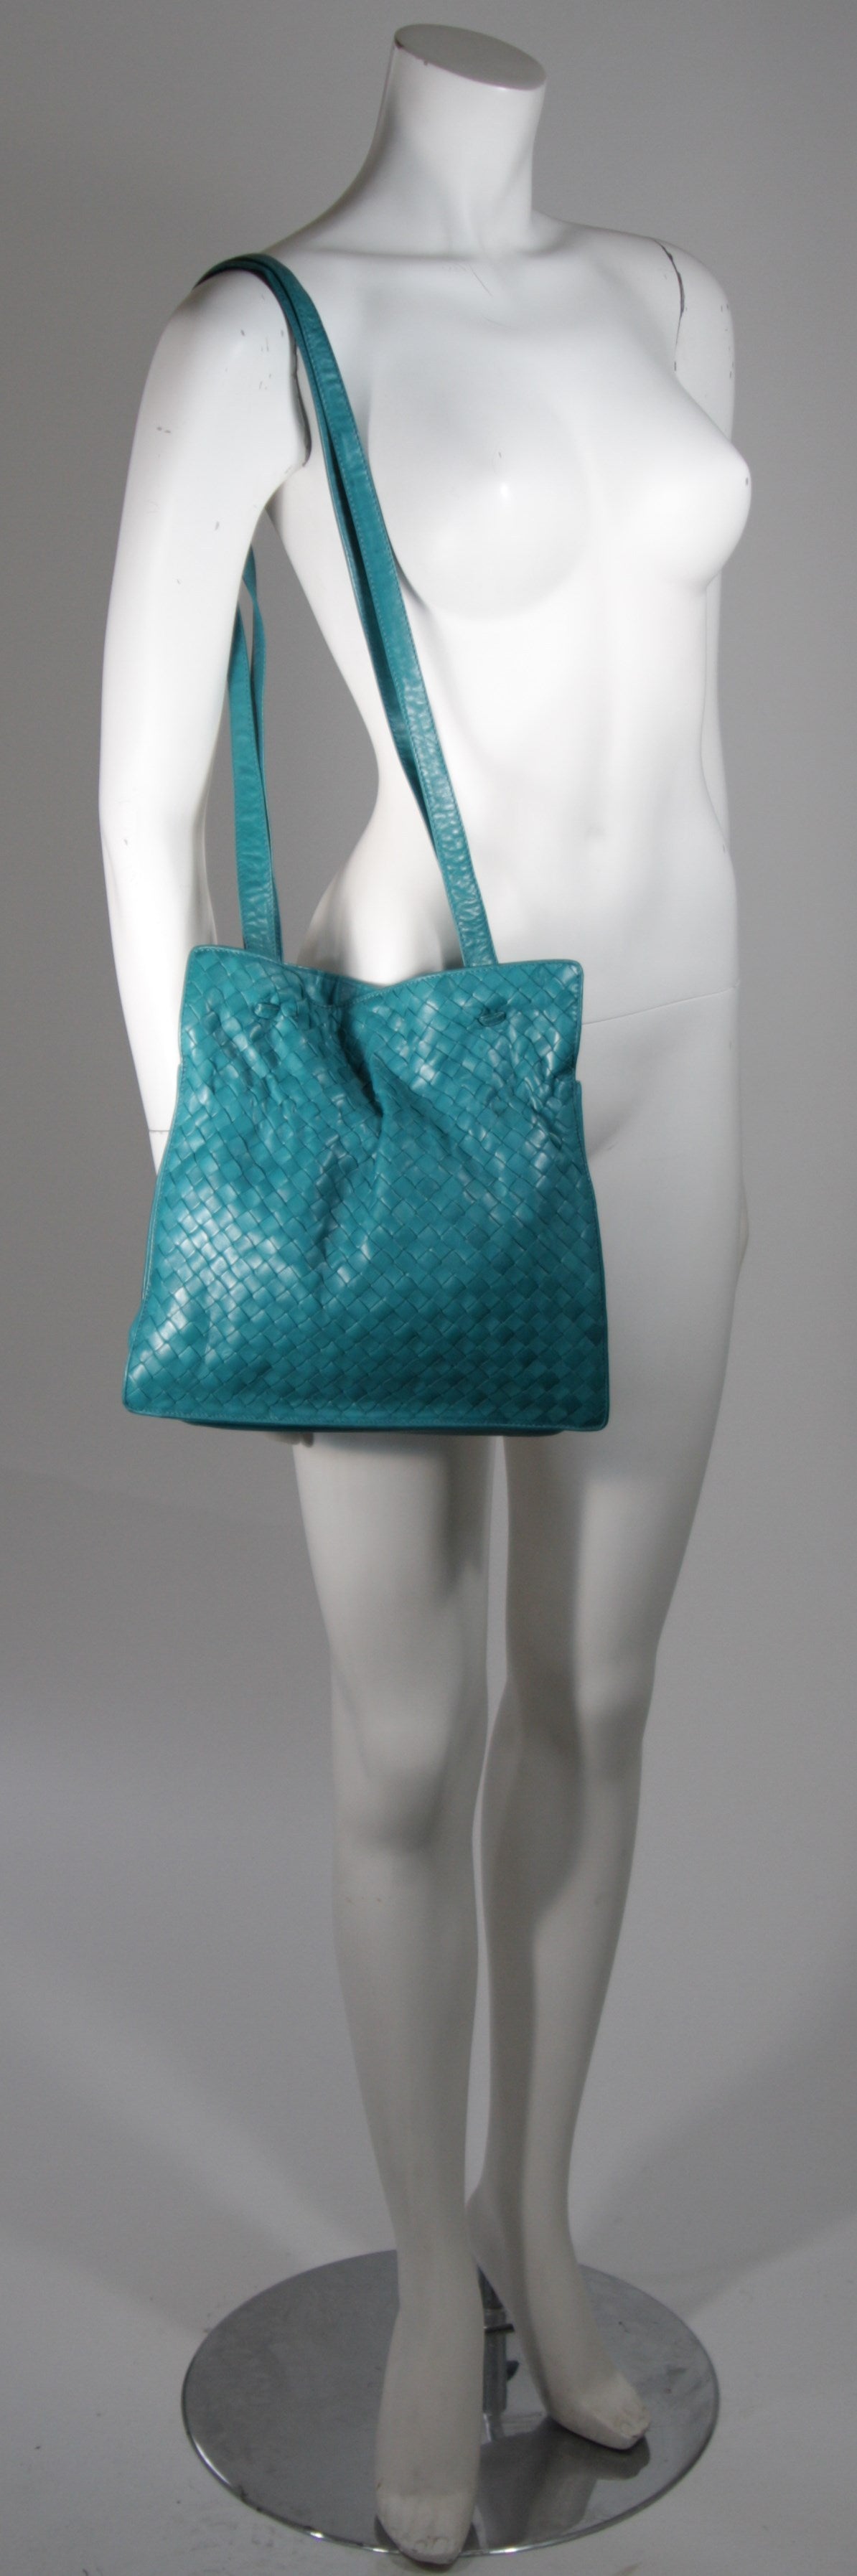 This vintage Bottega Veneta is available for viewing at our Beverly Hills Boutique. We offer a large selection of evening gowns and luxury garments.

This handbag is composed of a supple rich turquoise leather in the classic Bottega Veneta